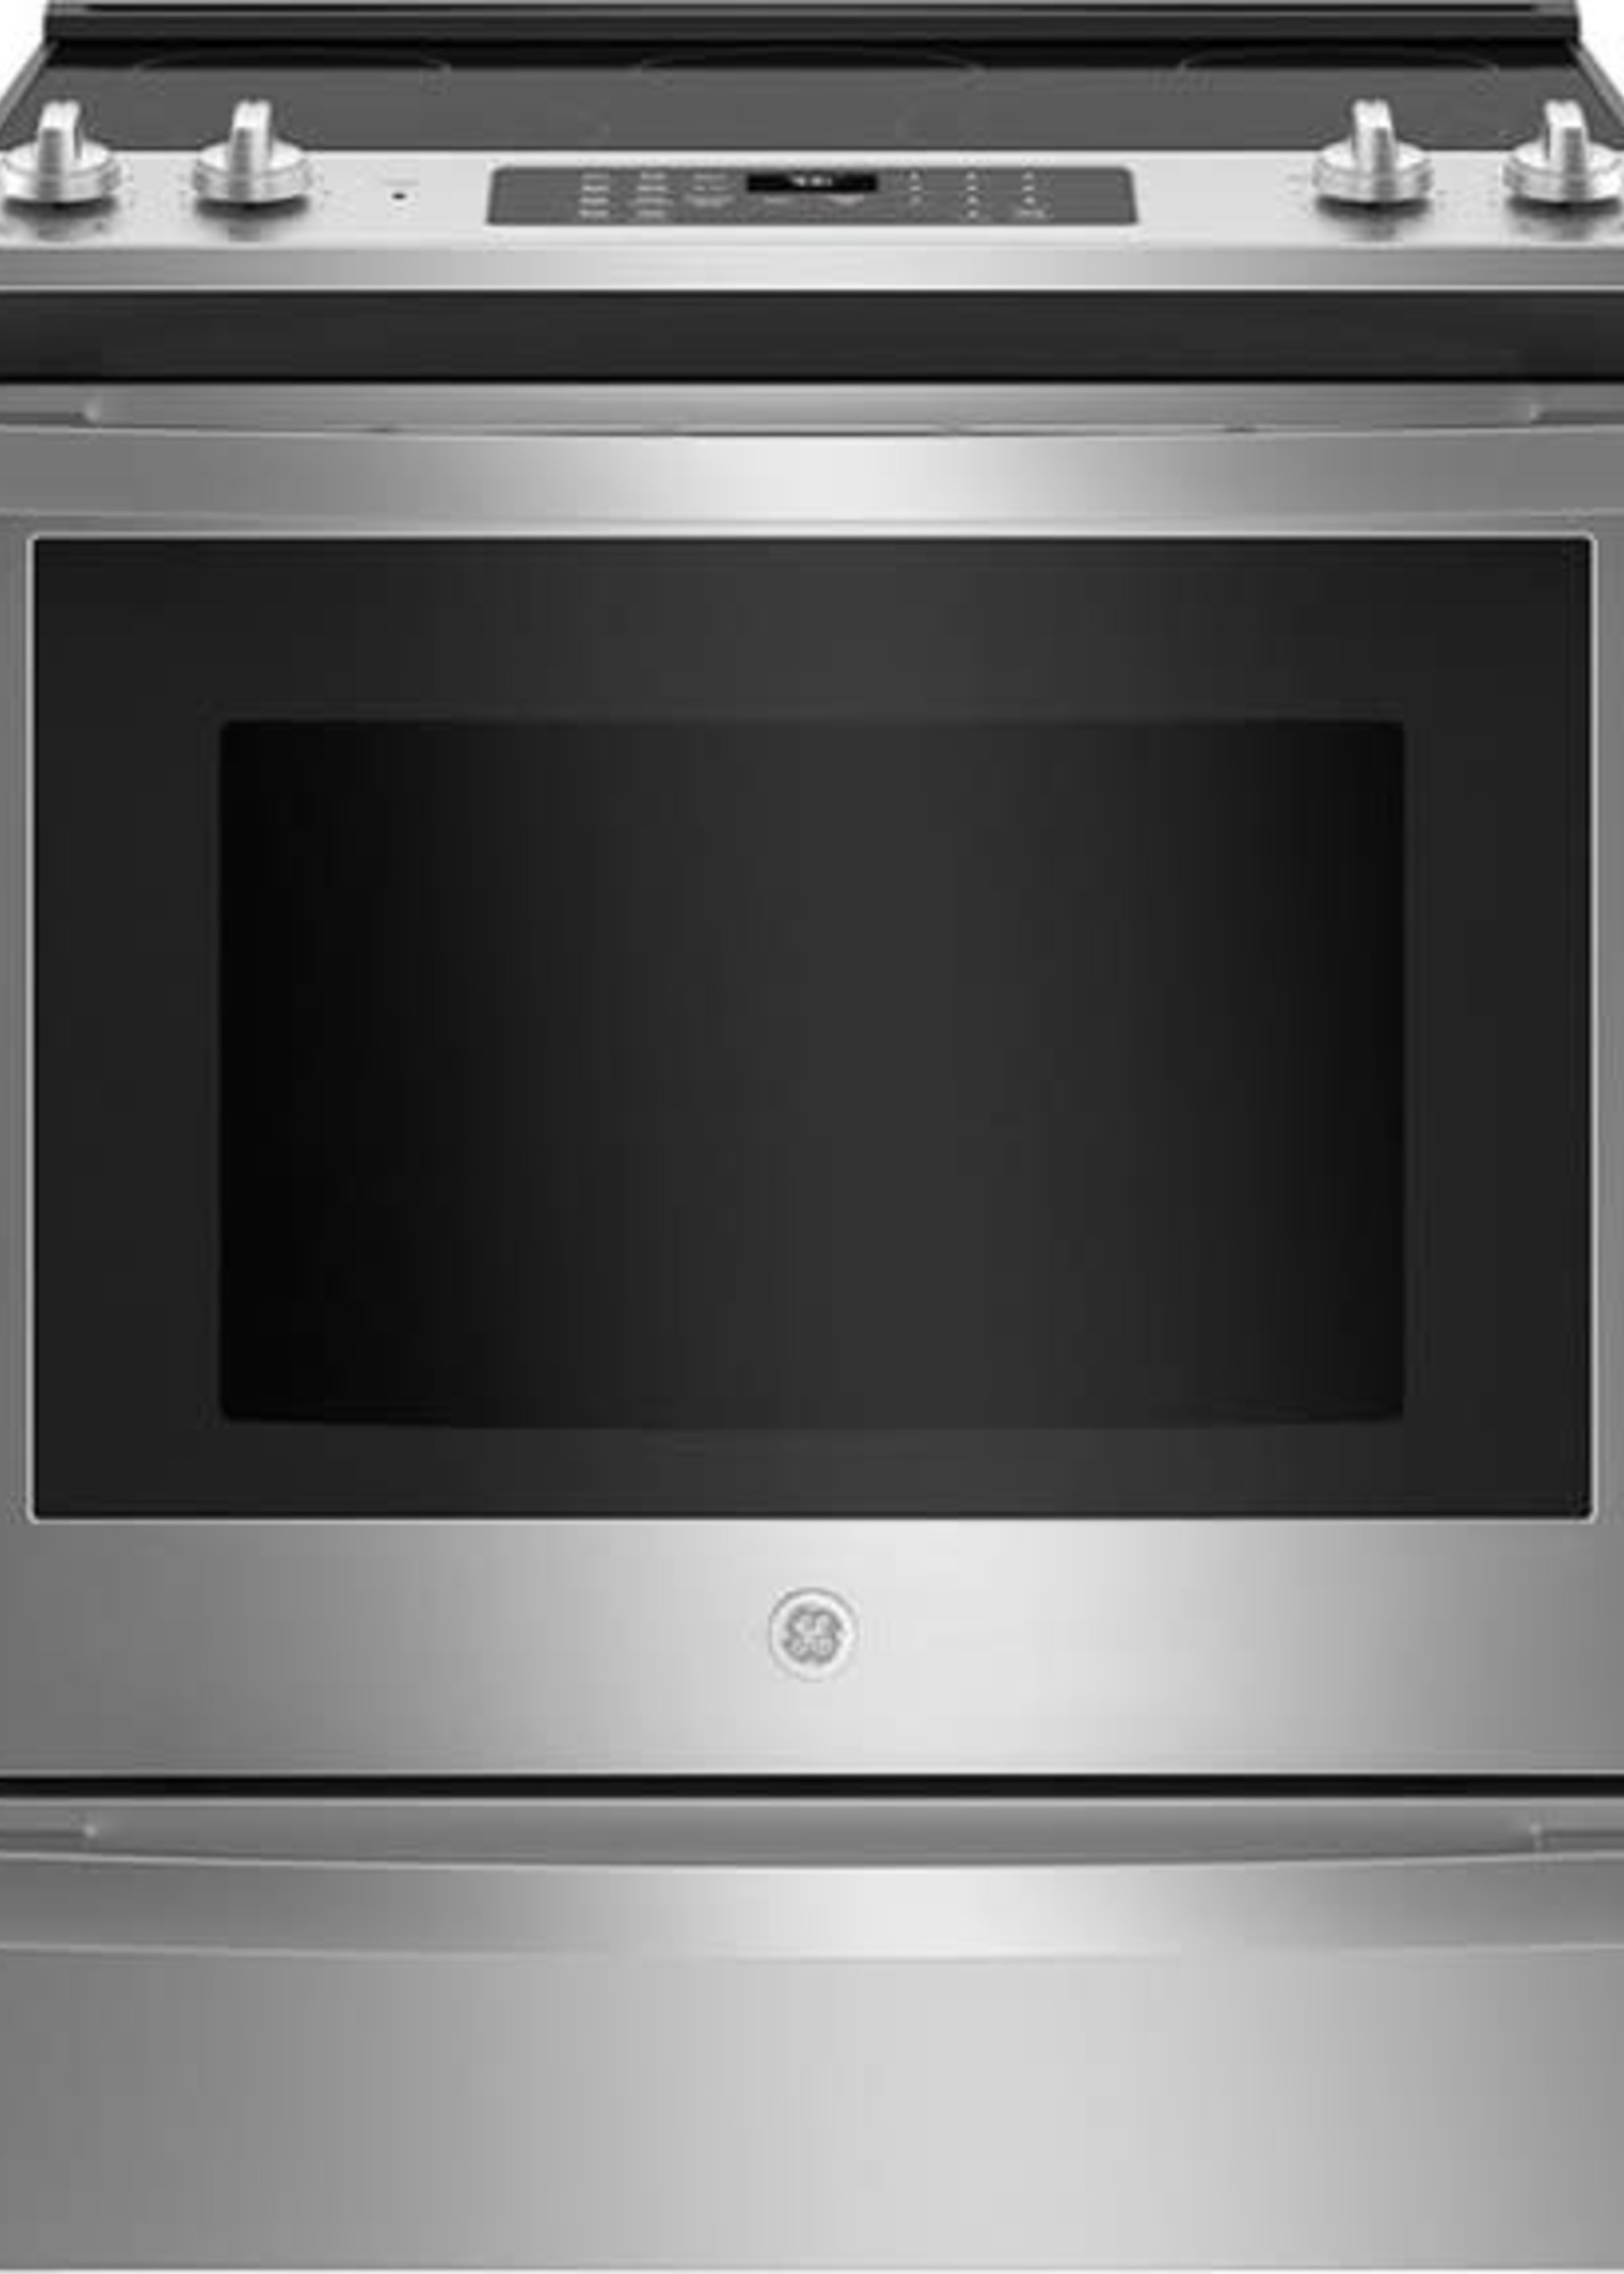 GE *GE  JS760SPSS   5.3 Cu. Ft. Slide-In Electric Convection Range with Self-Steam Cleaning, Built-In Wi-Fi, and No-Preheat Air Fry - Stainless steel